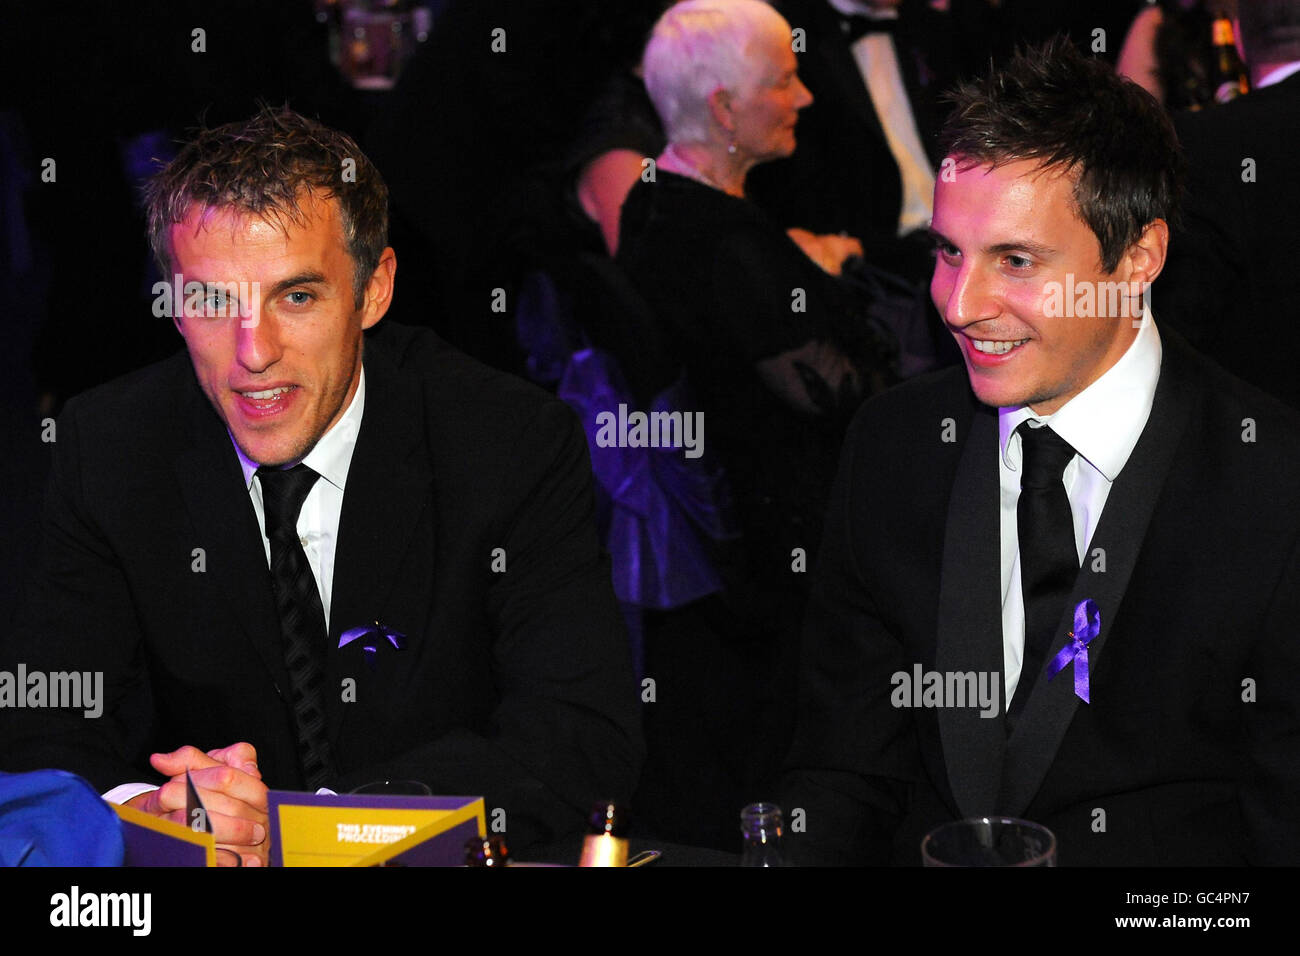 Soccer - Liverpool Unites Charity Dinner - Goodison Park. Phil Neville and Phil Jagielka at the Liverpool Unites Charity Dinner at Goodison Park Stadium, Everton, Liverpool. Stock Photo